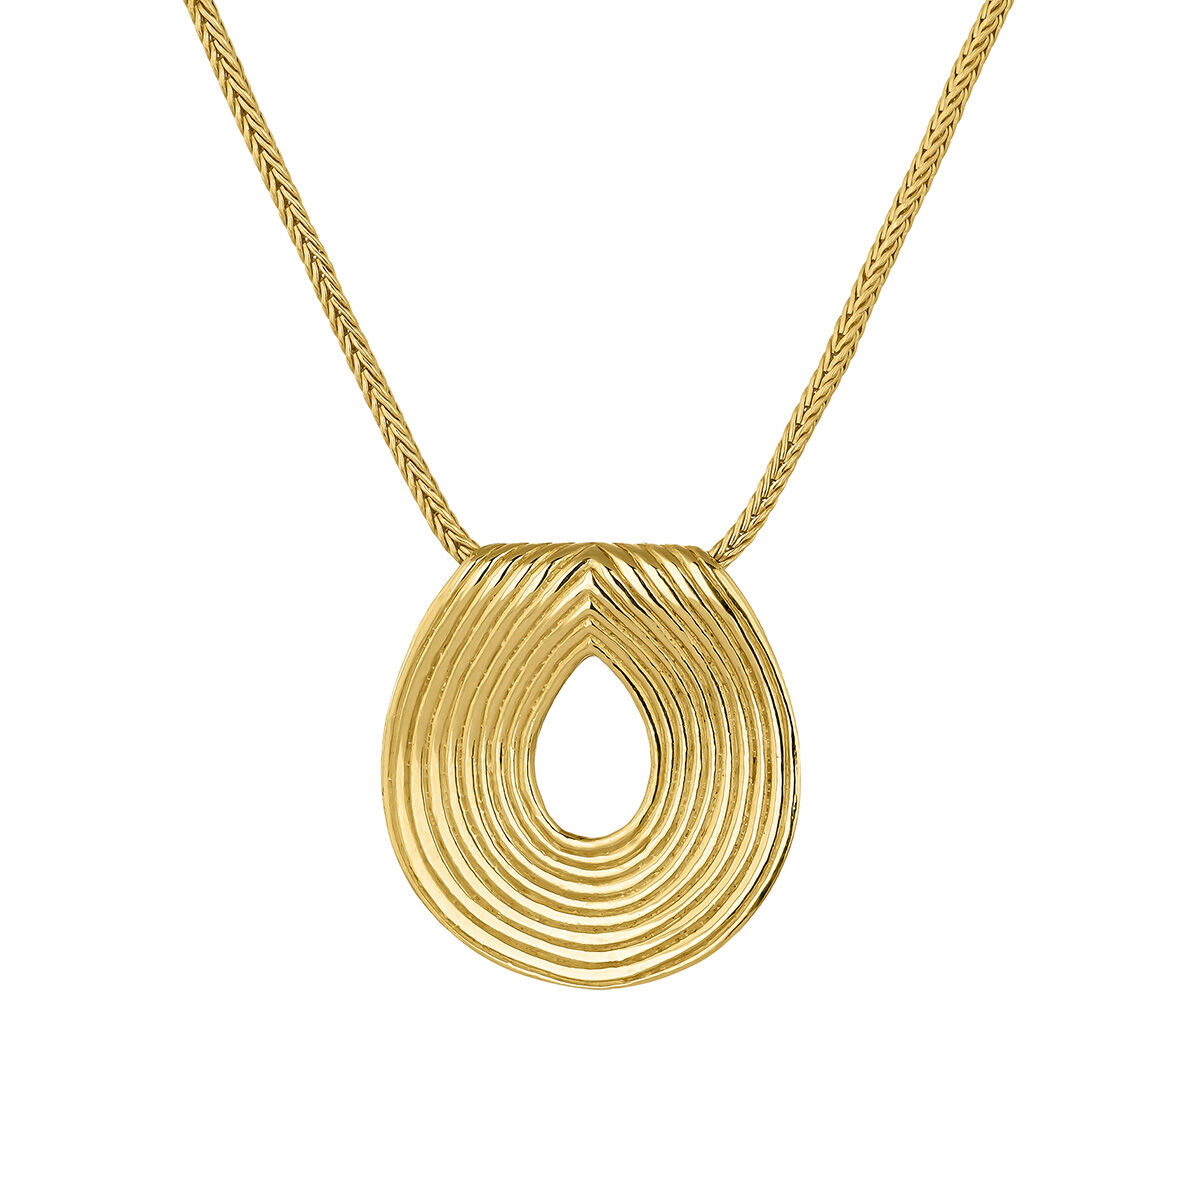 Oval-shaped, embossed pendant in 18kt yellow gold-plated sterling silver, J05212-02, hi-res